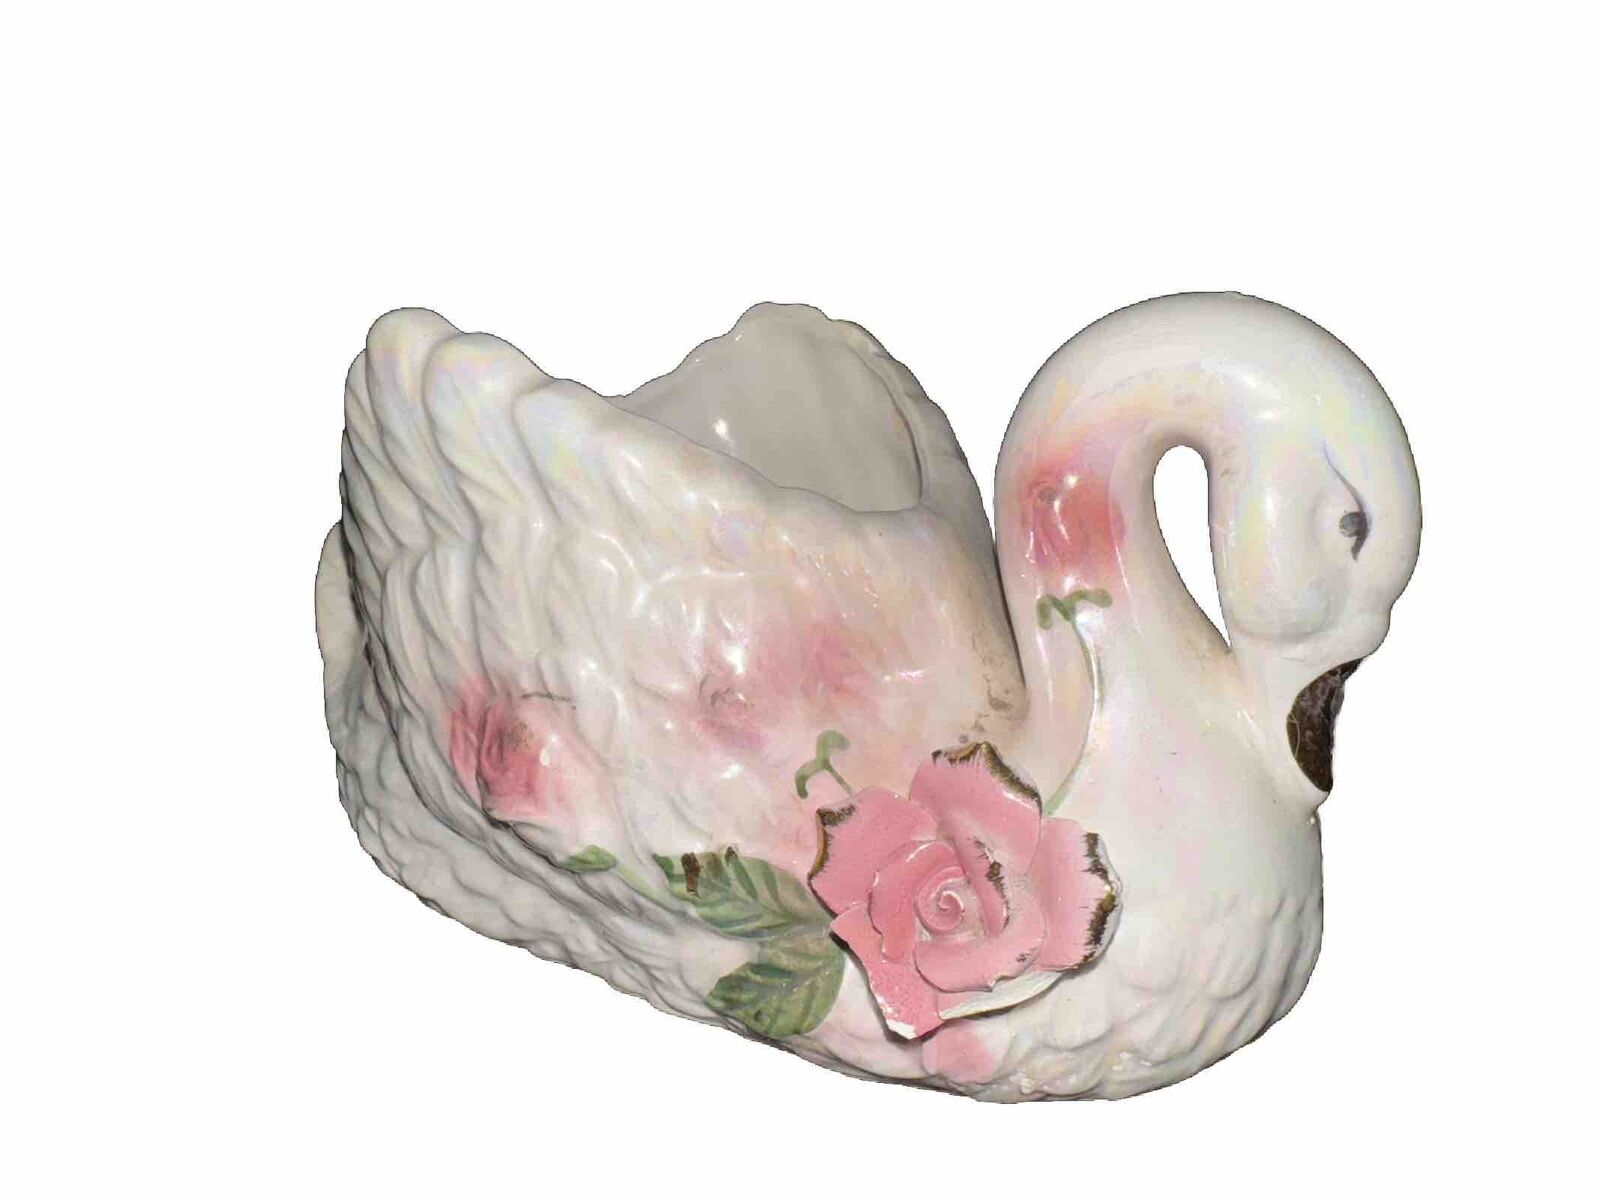 Swan Planter Vintage Gorgeous white pearl Ceramic with Pink Roses